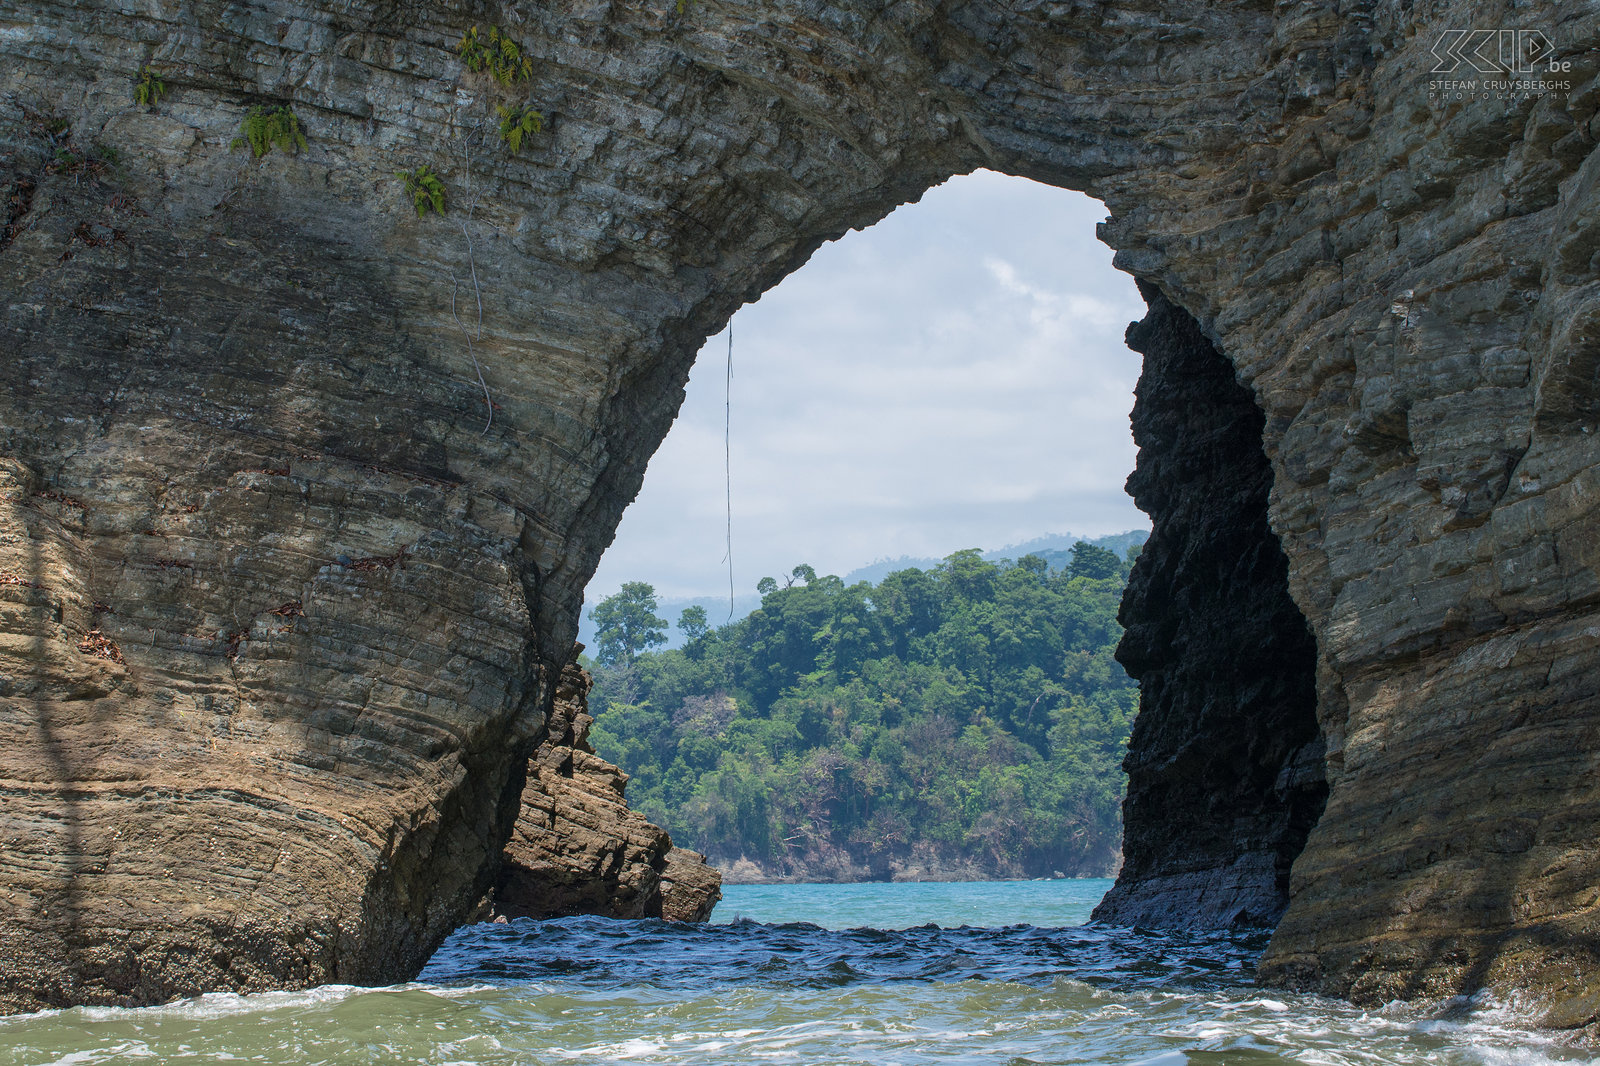 Uvita - Bahia Ballena - Cave During our boat trip also we went to the famous sea caves of Ventana Beach in Marino Ballena national park. Stefan Cruysberghs